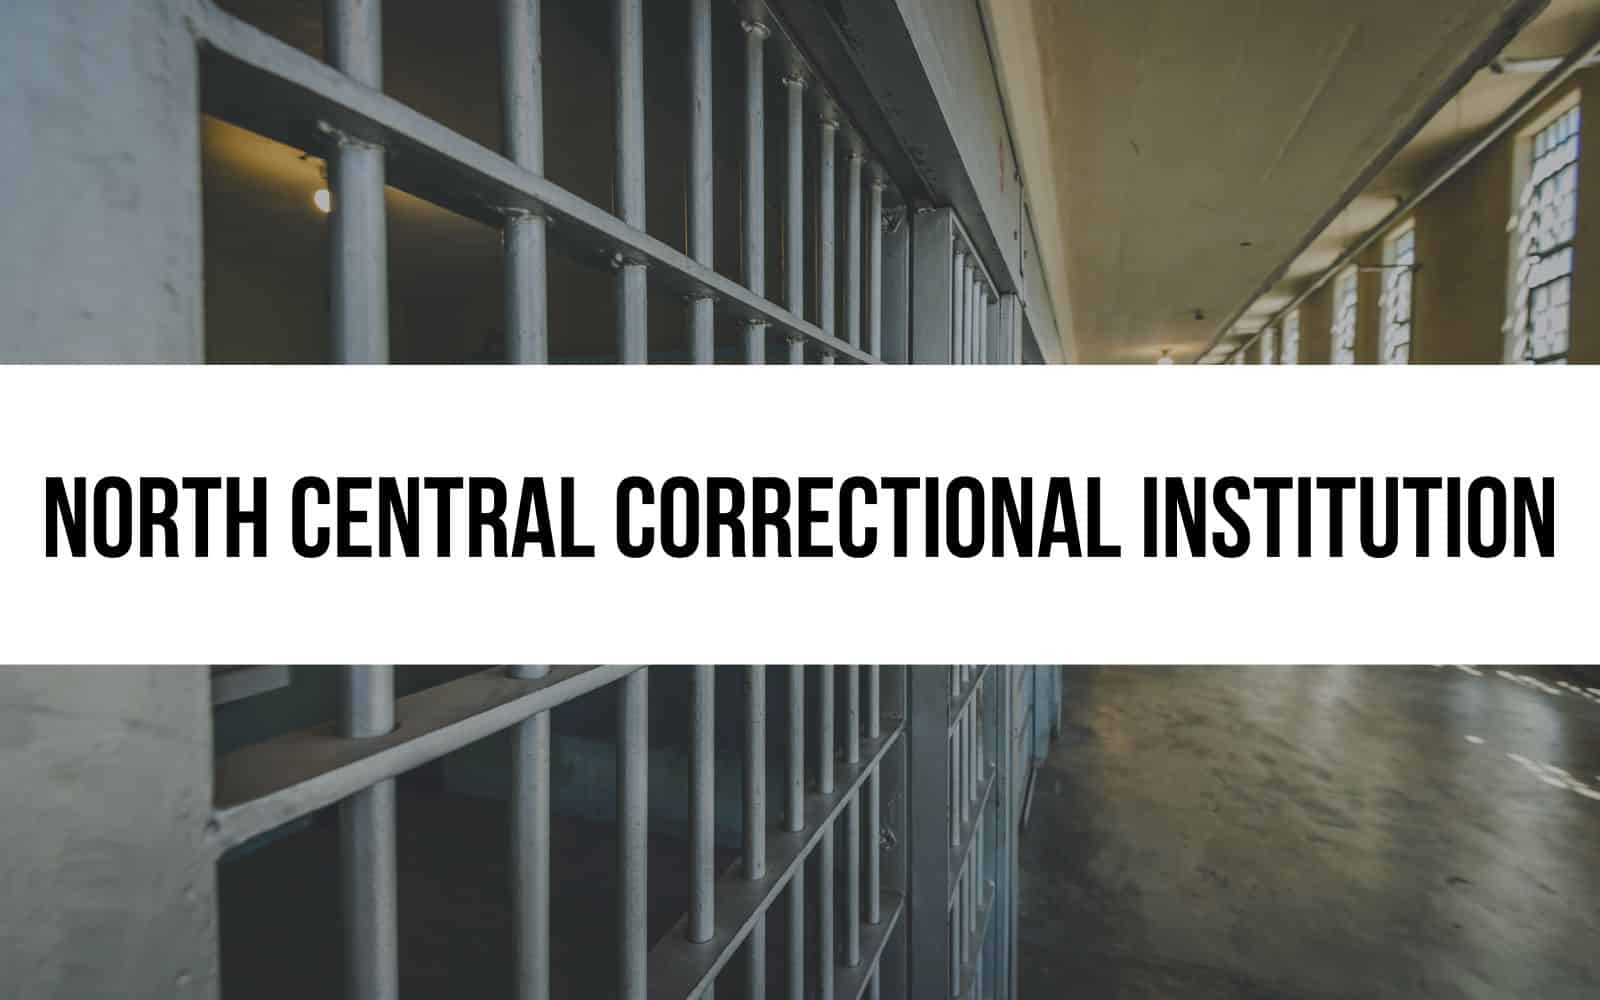 North Central Correctional Institution